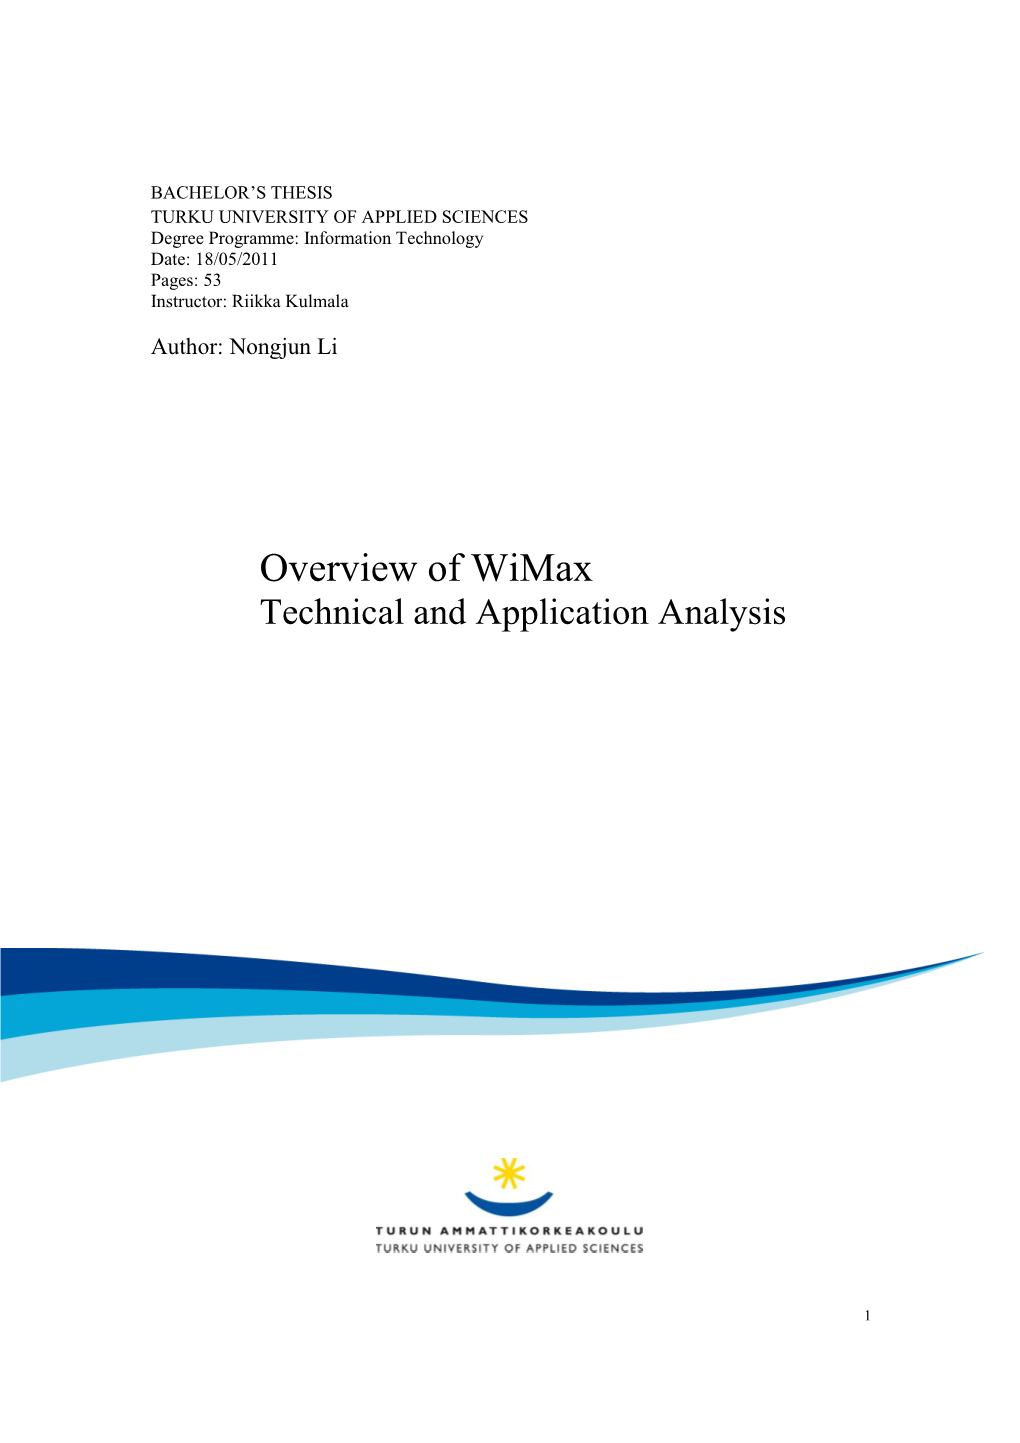 Overview of Wimax Technical and Application Analysis